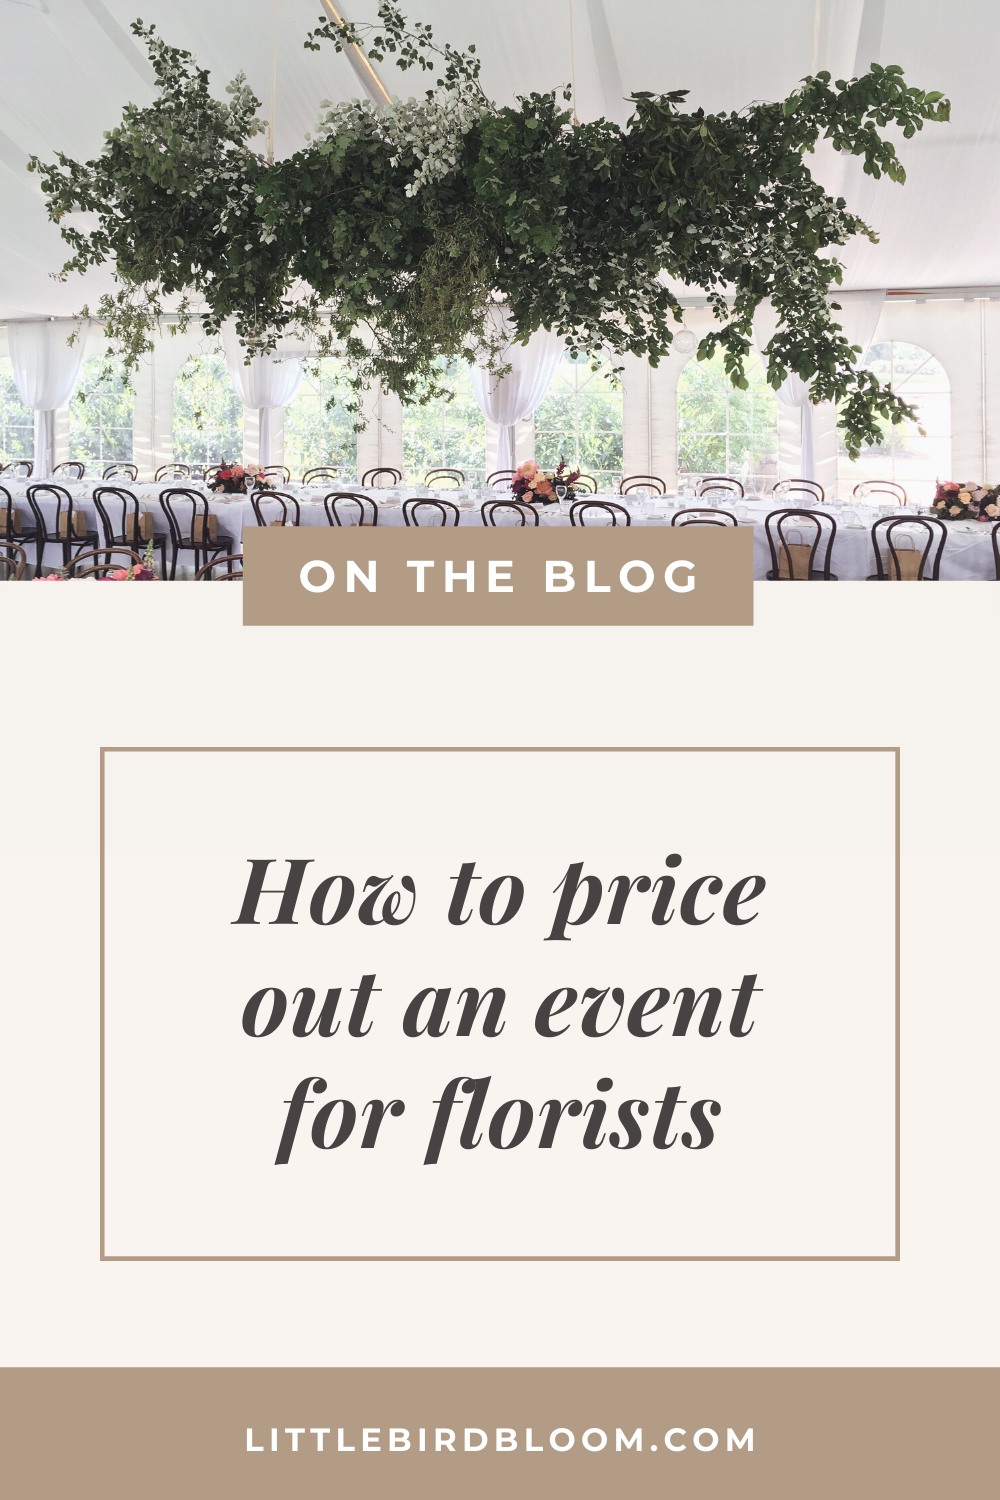 Blog Post – how to price out an event for florists